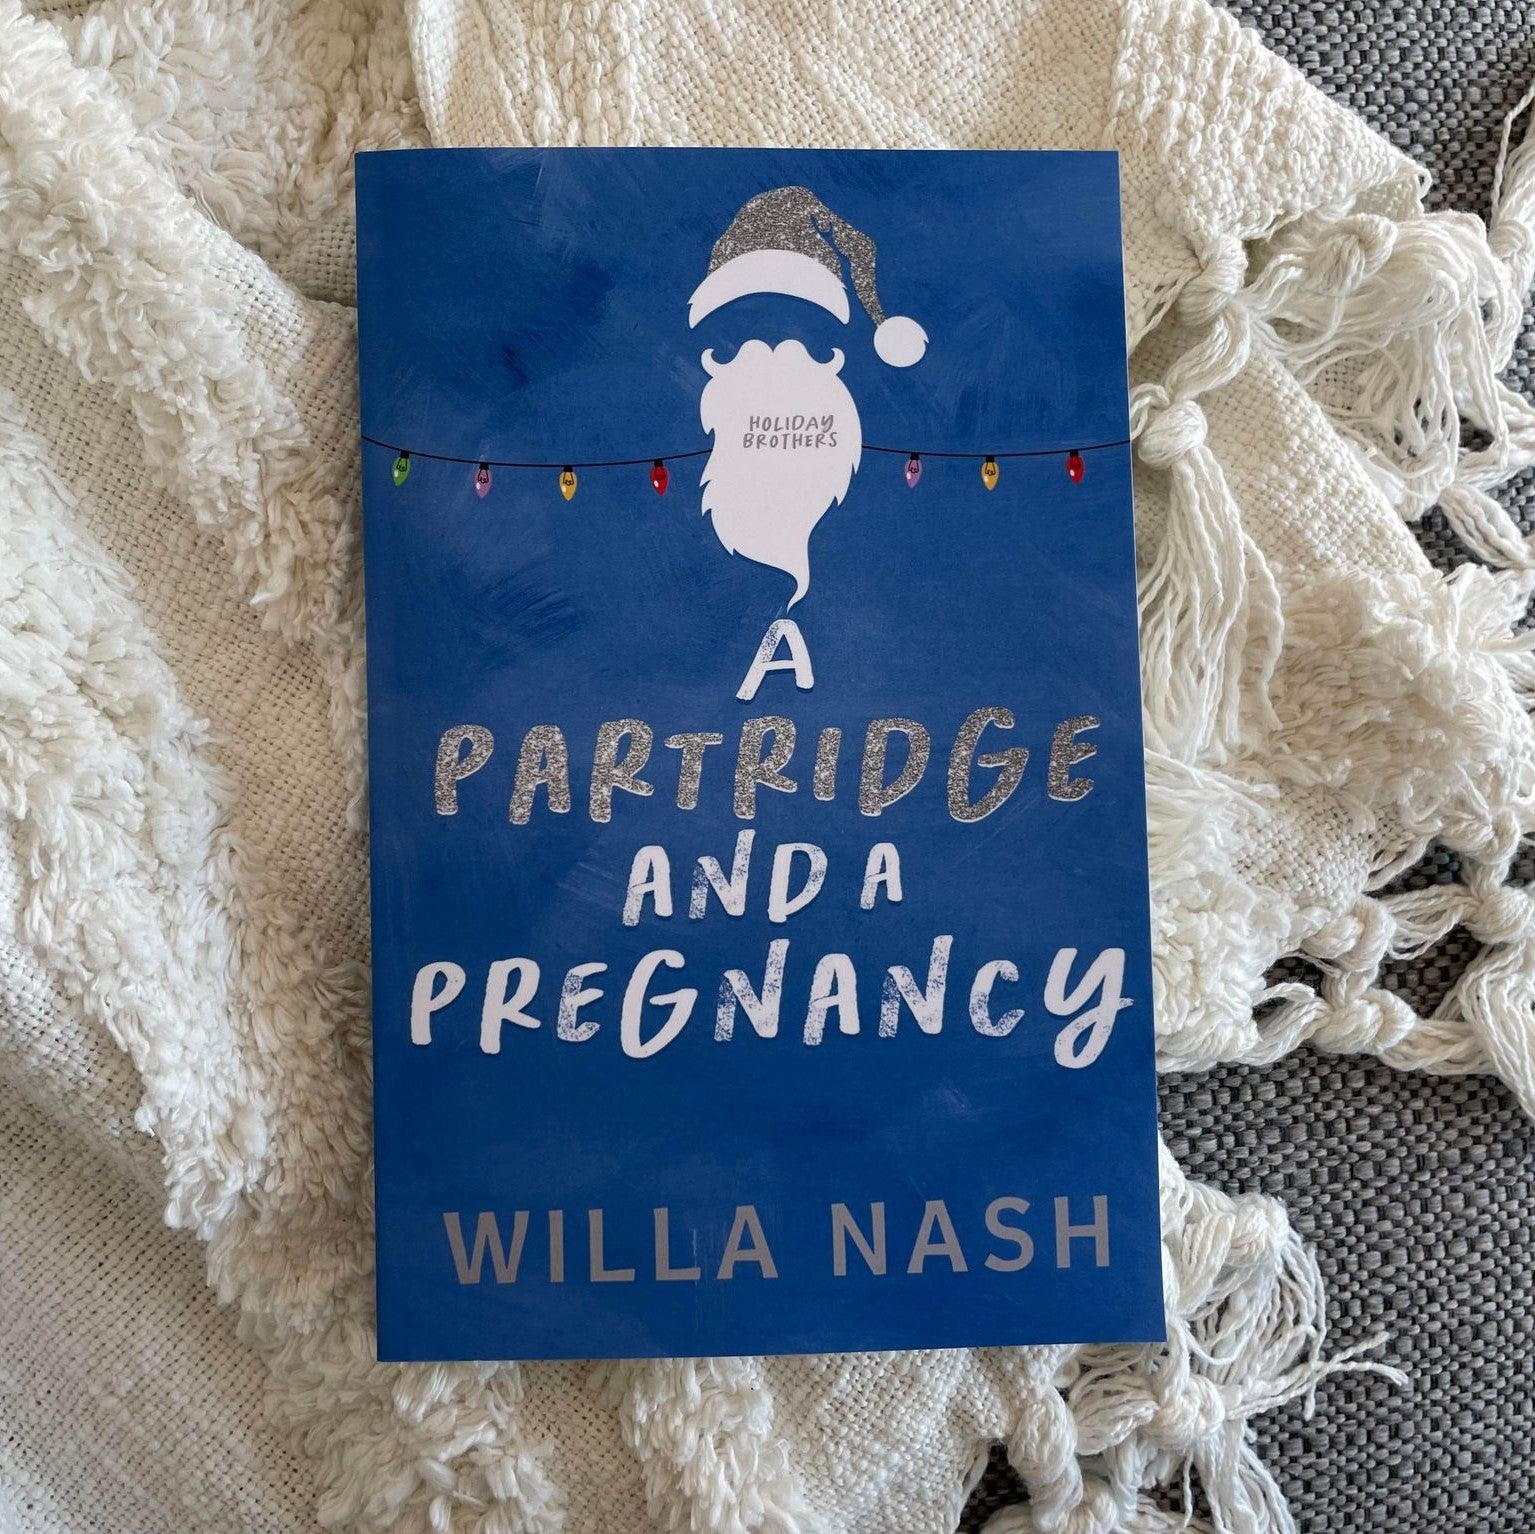 A Partridge and a Pregnancy by Willa Nash